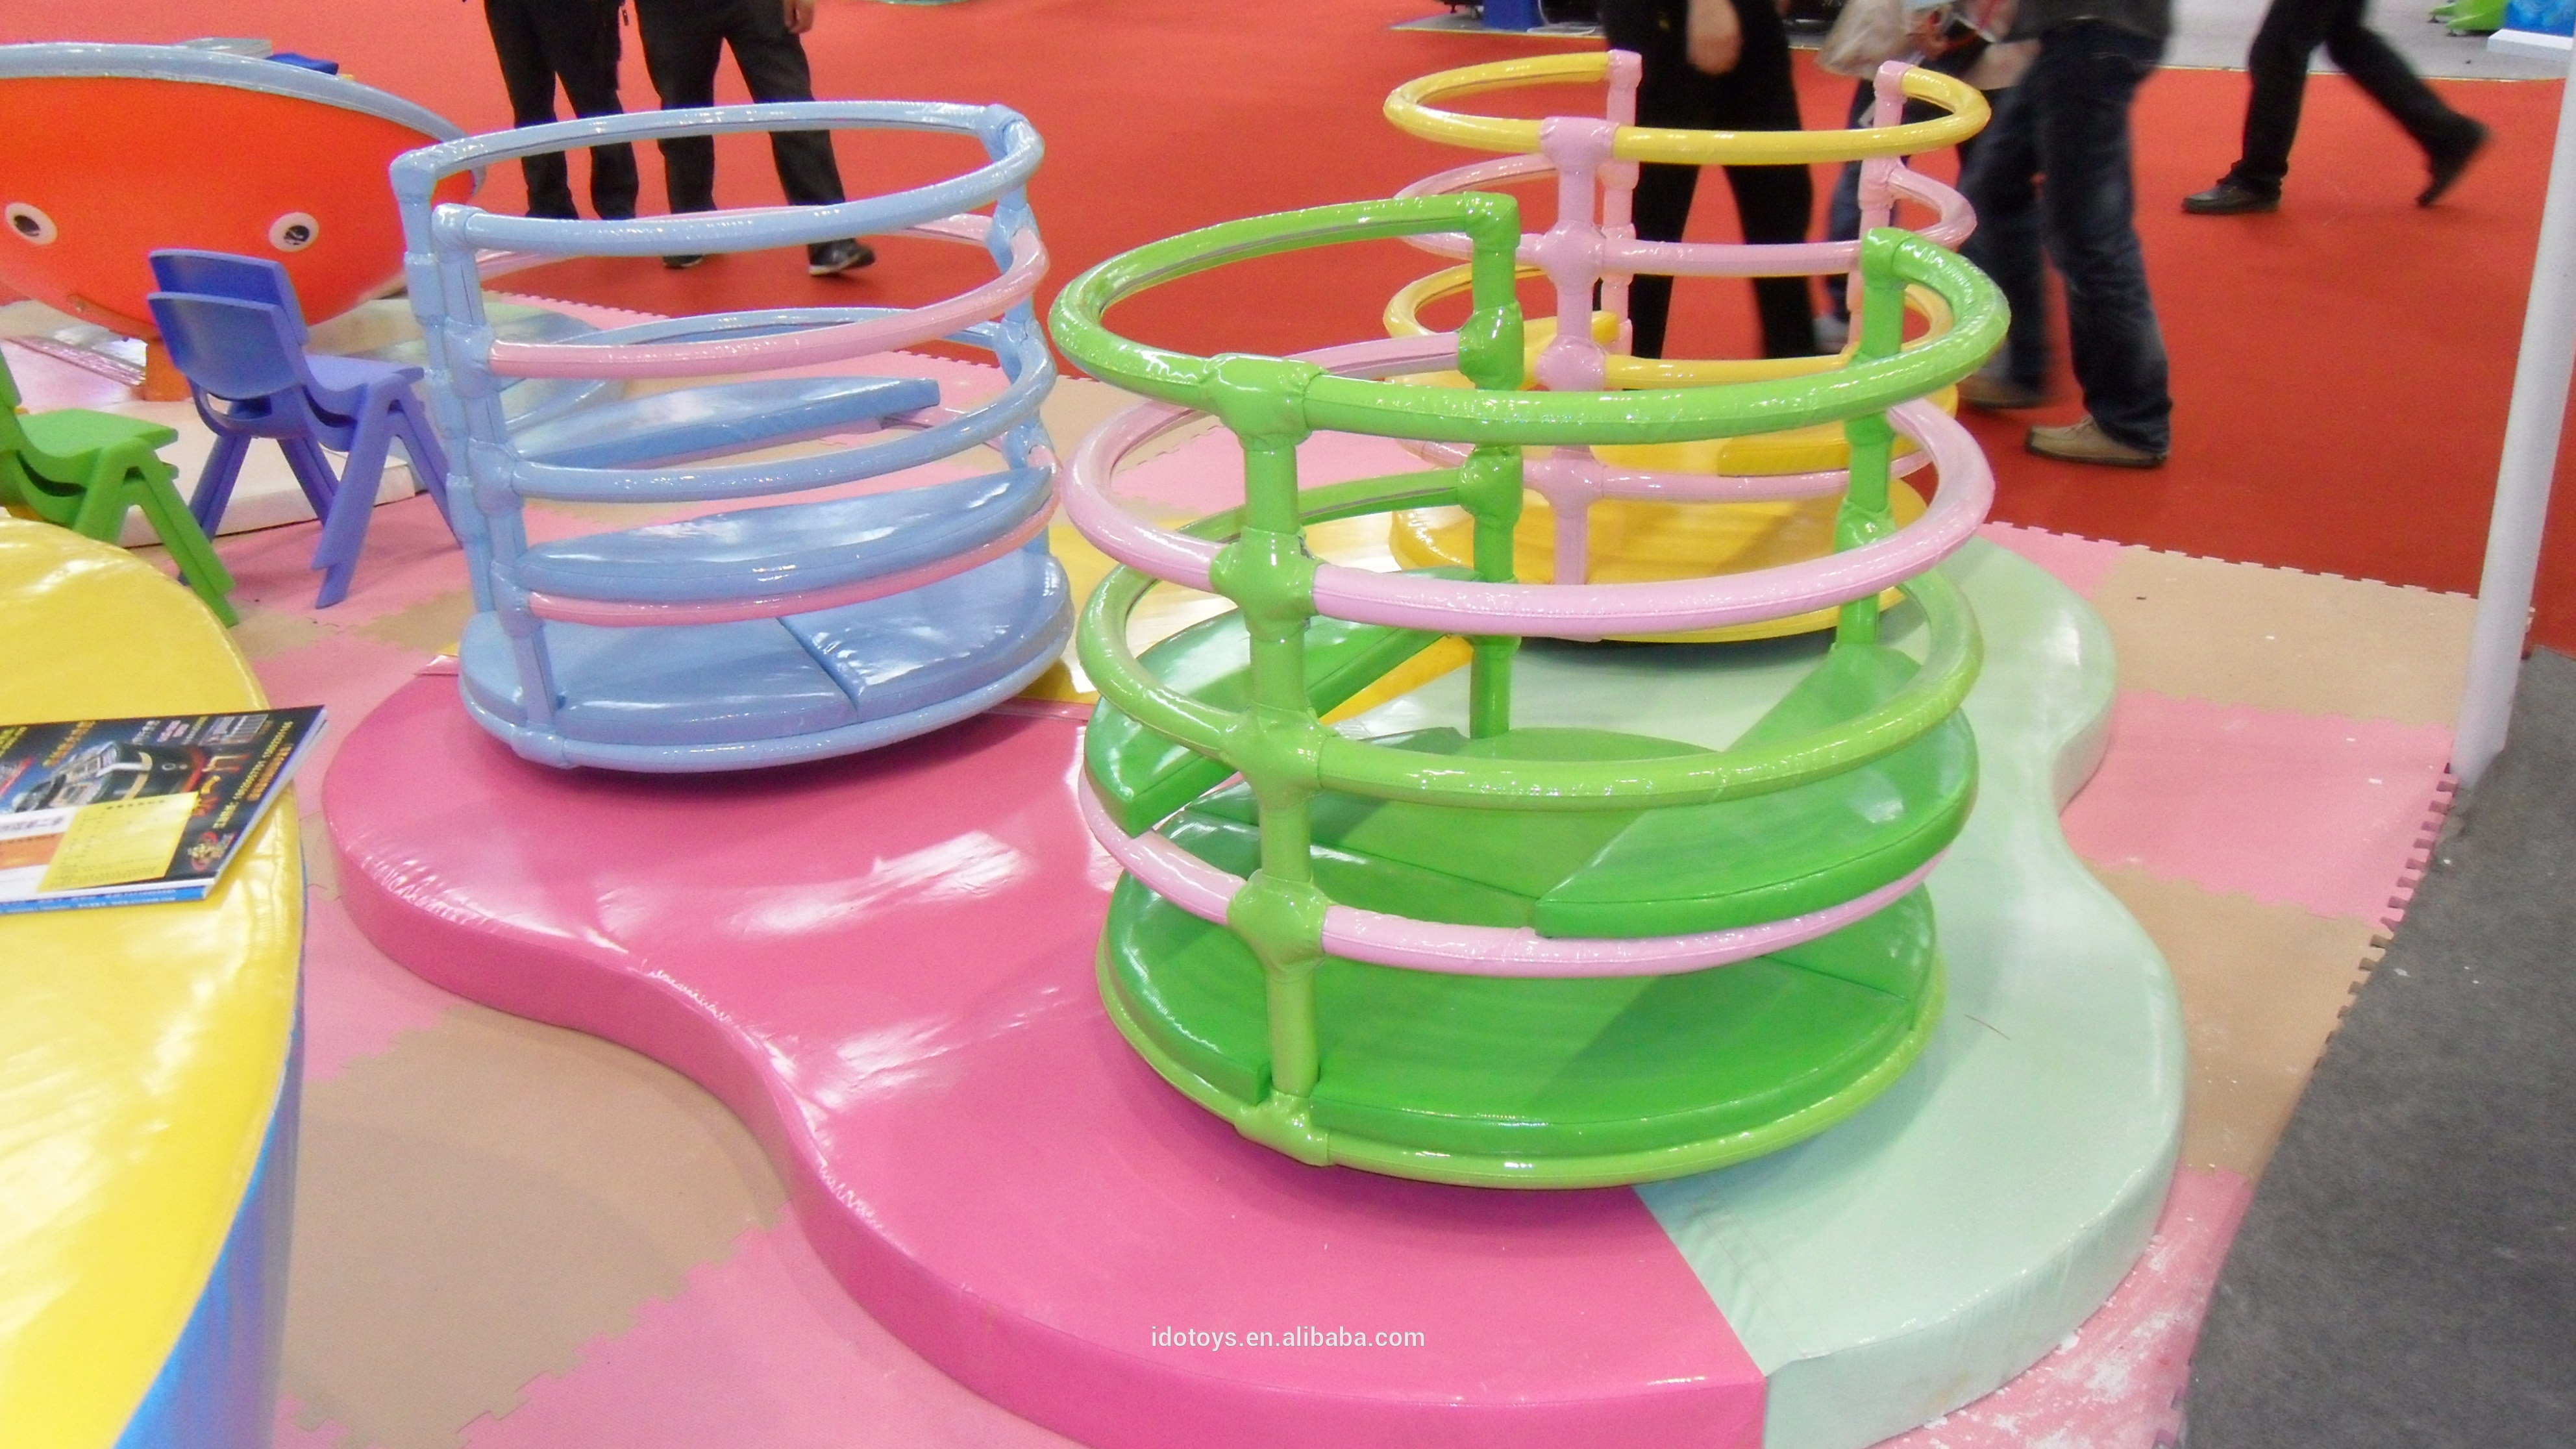 Kids Electric Soft Play Equipment